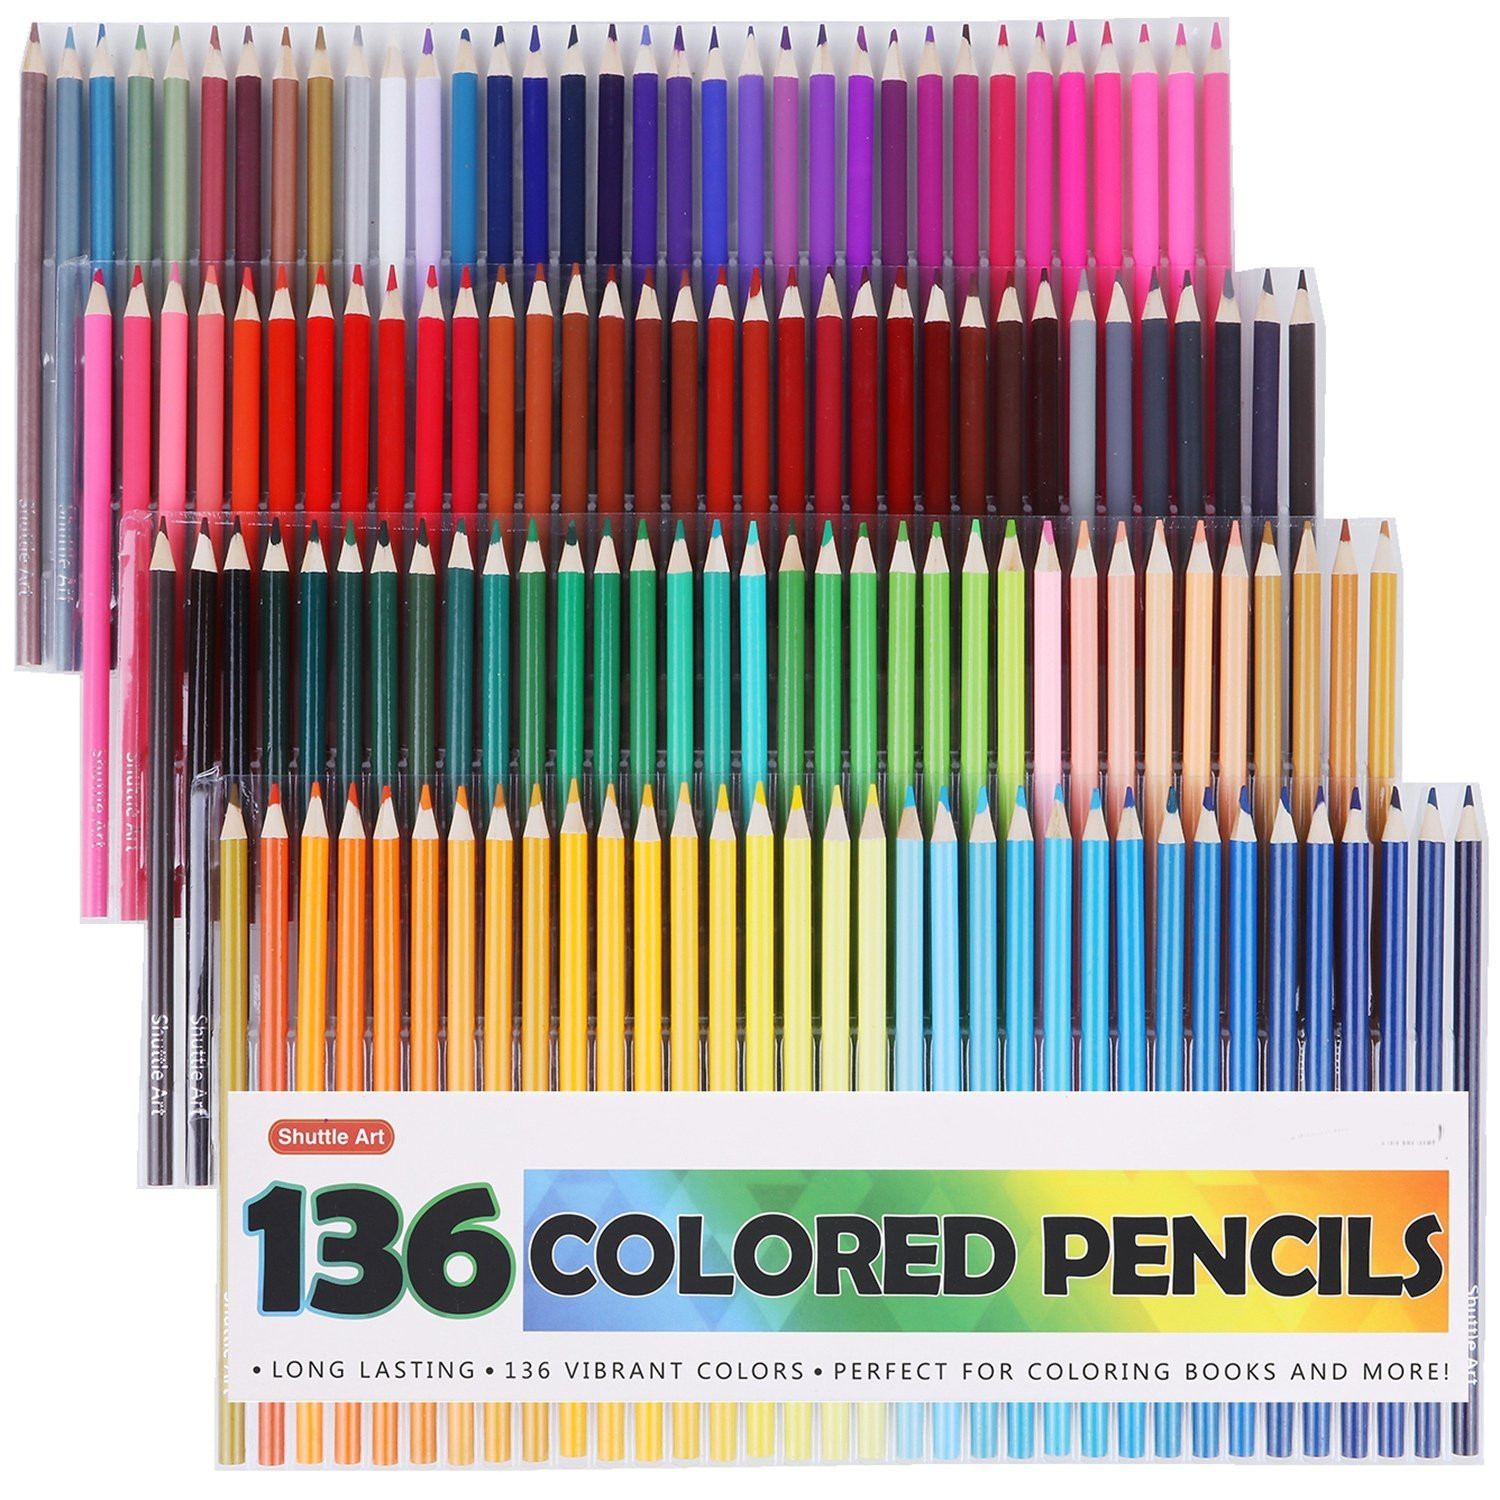 Colored Pencil Coloring Books
 Shuttle Art 136 Colored Pencils Set for Adult Coloring